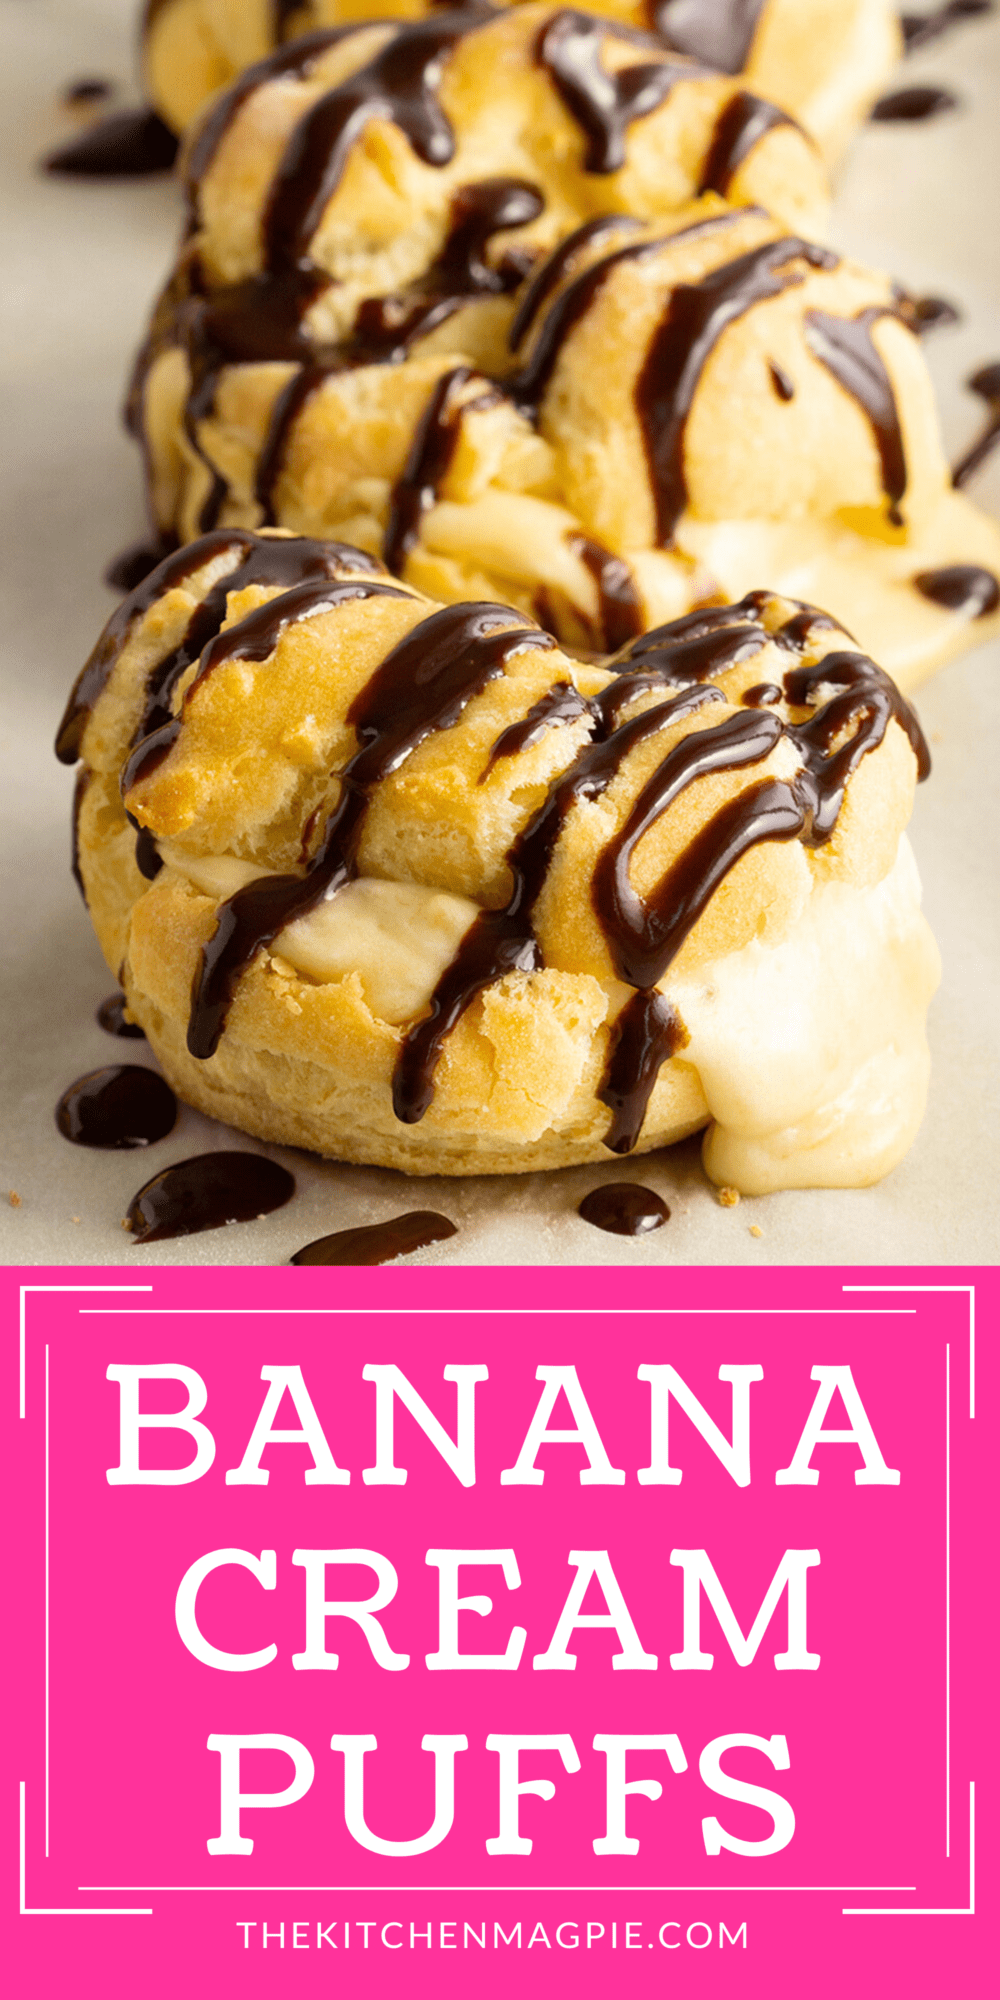 With all the flavor of a banana cream pie in a handy, convenient light pastry, the banana cream puff is the ultimate baked treat!